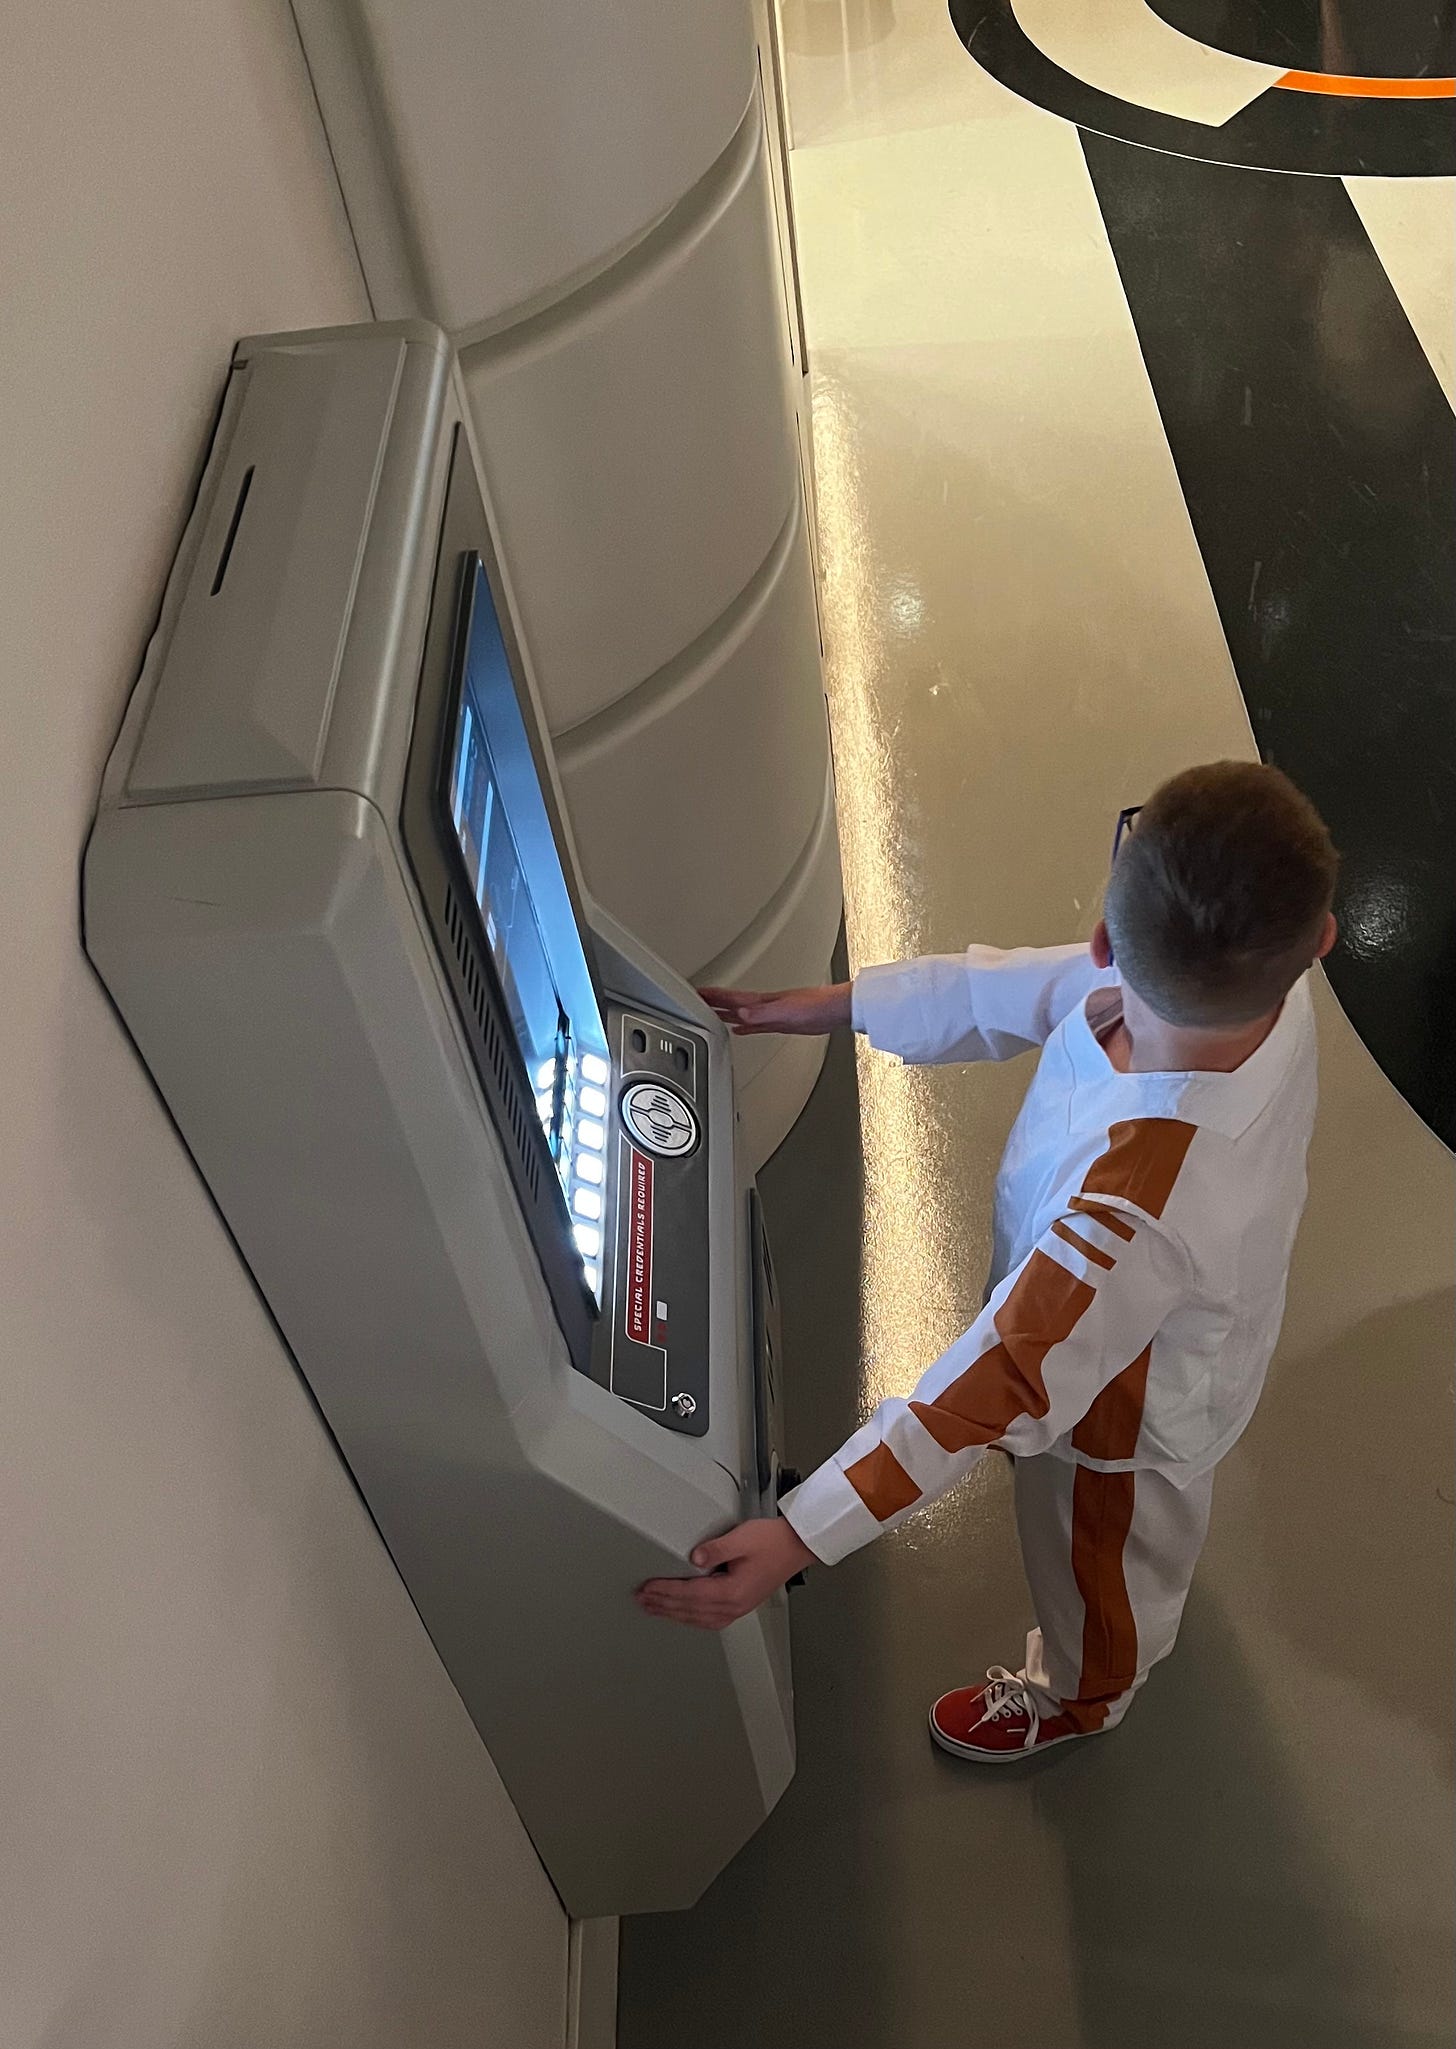 A child uses a console